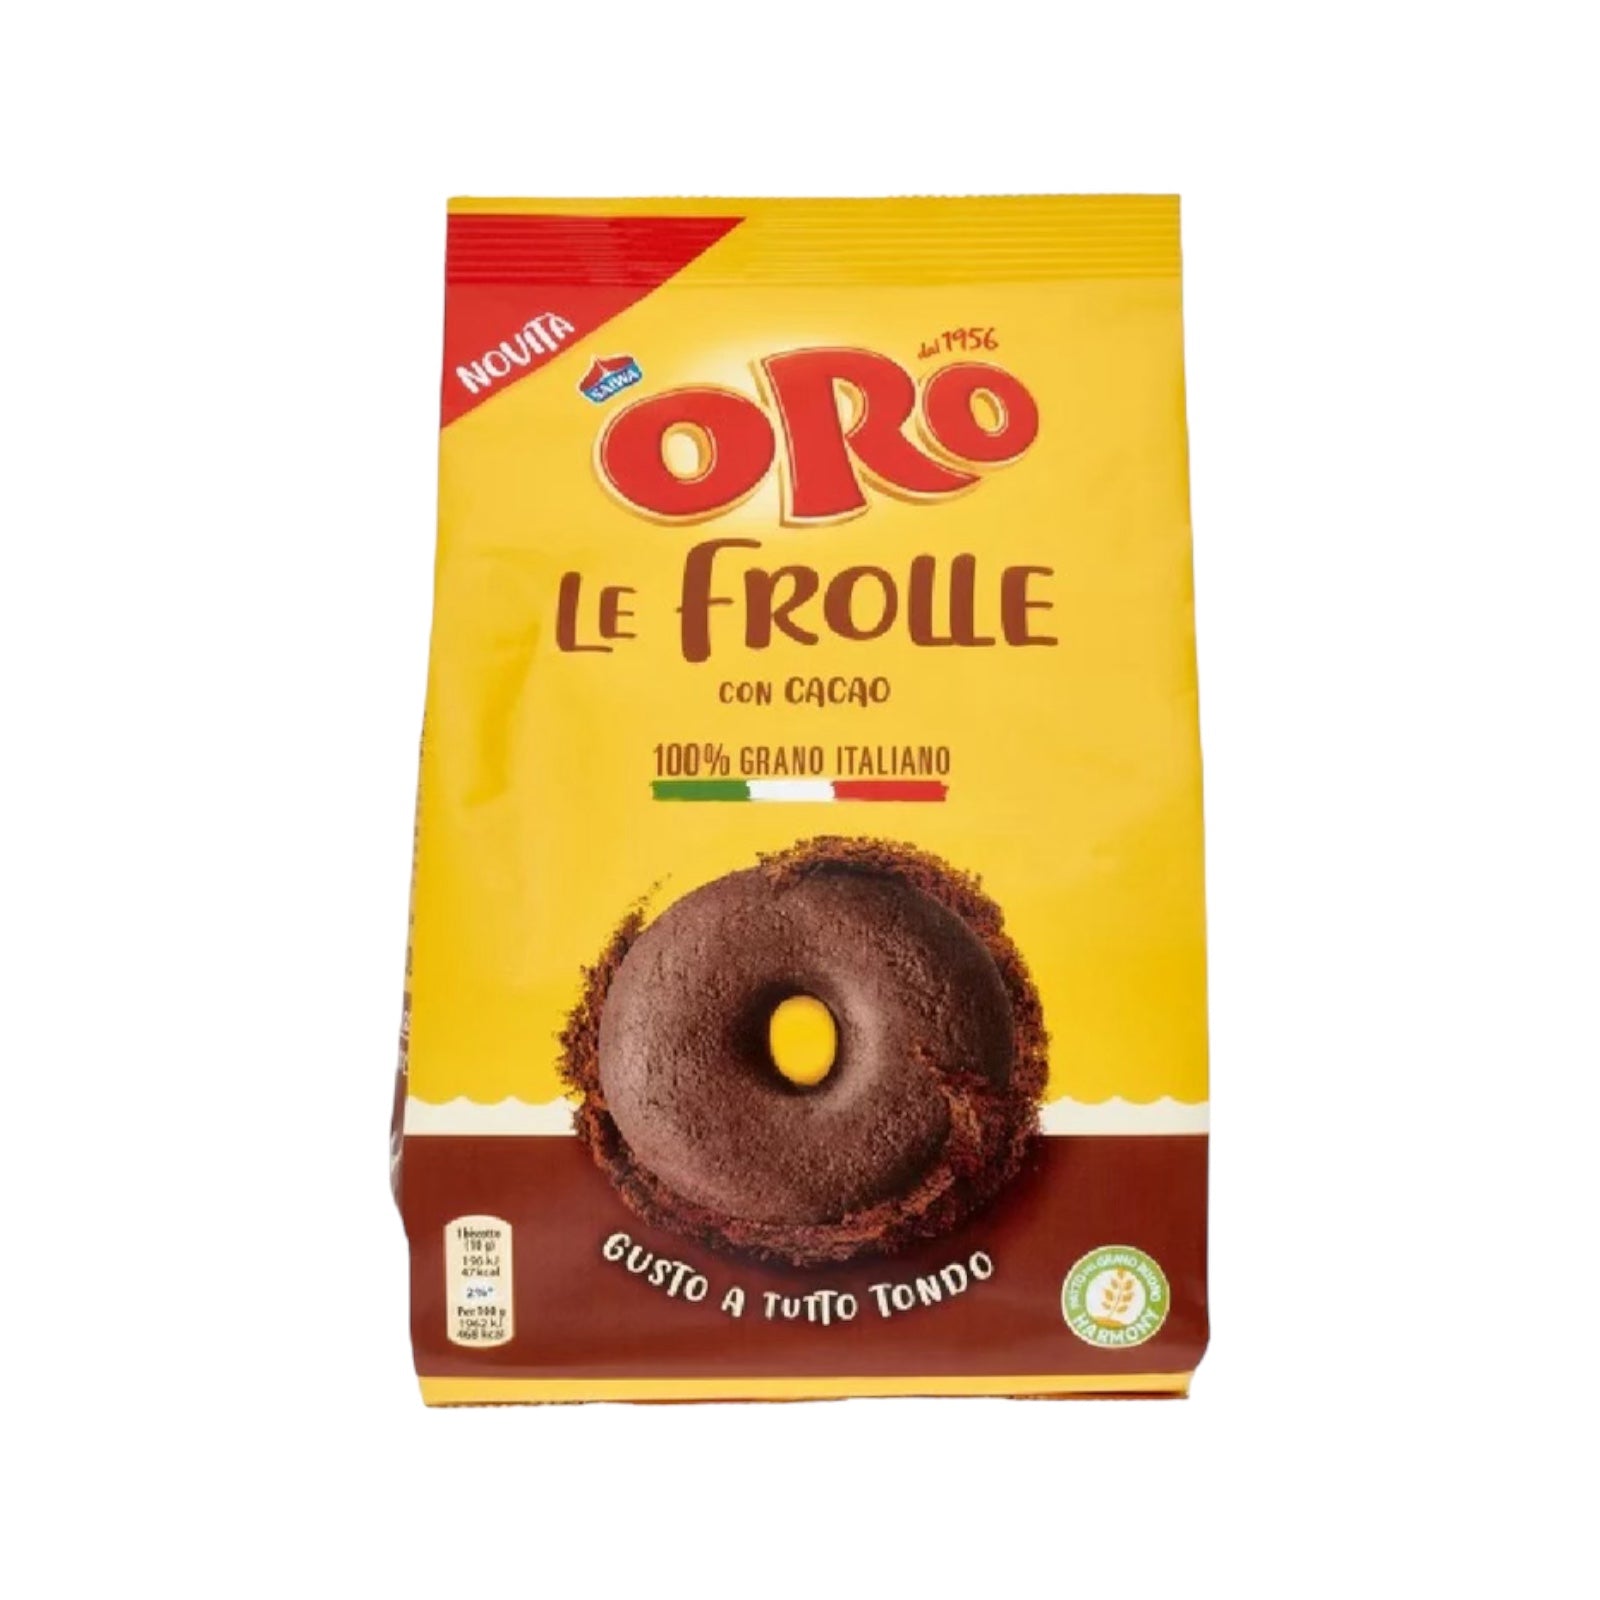 BEST BEFORE MAY/31/24 Saiwa Oro Le Frolle Cocoa Biscuits 300g